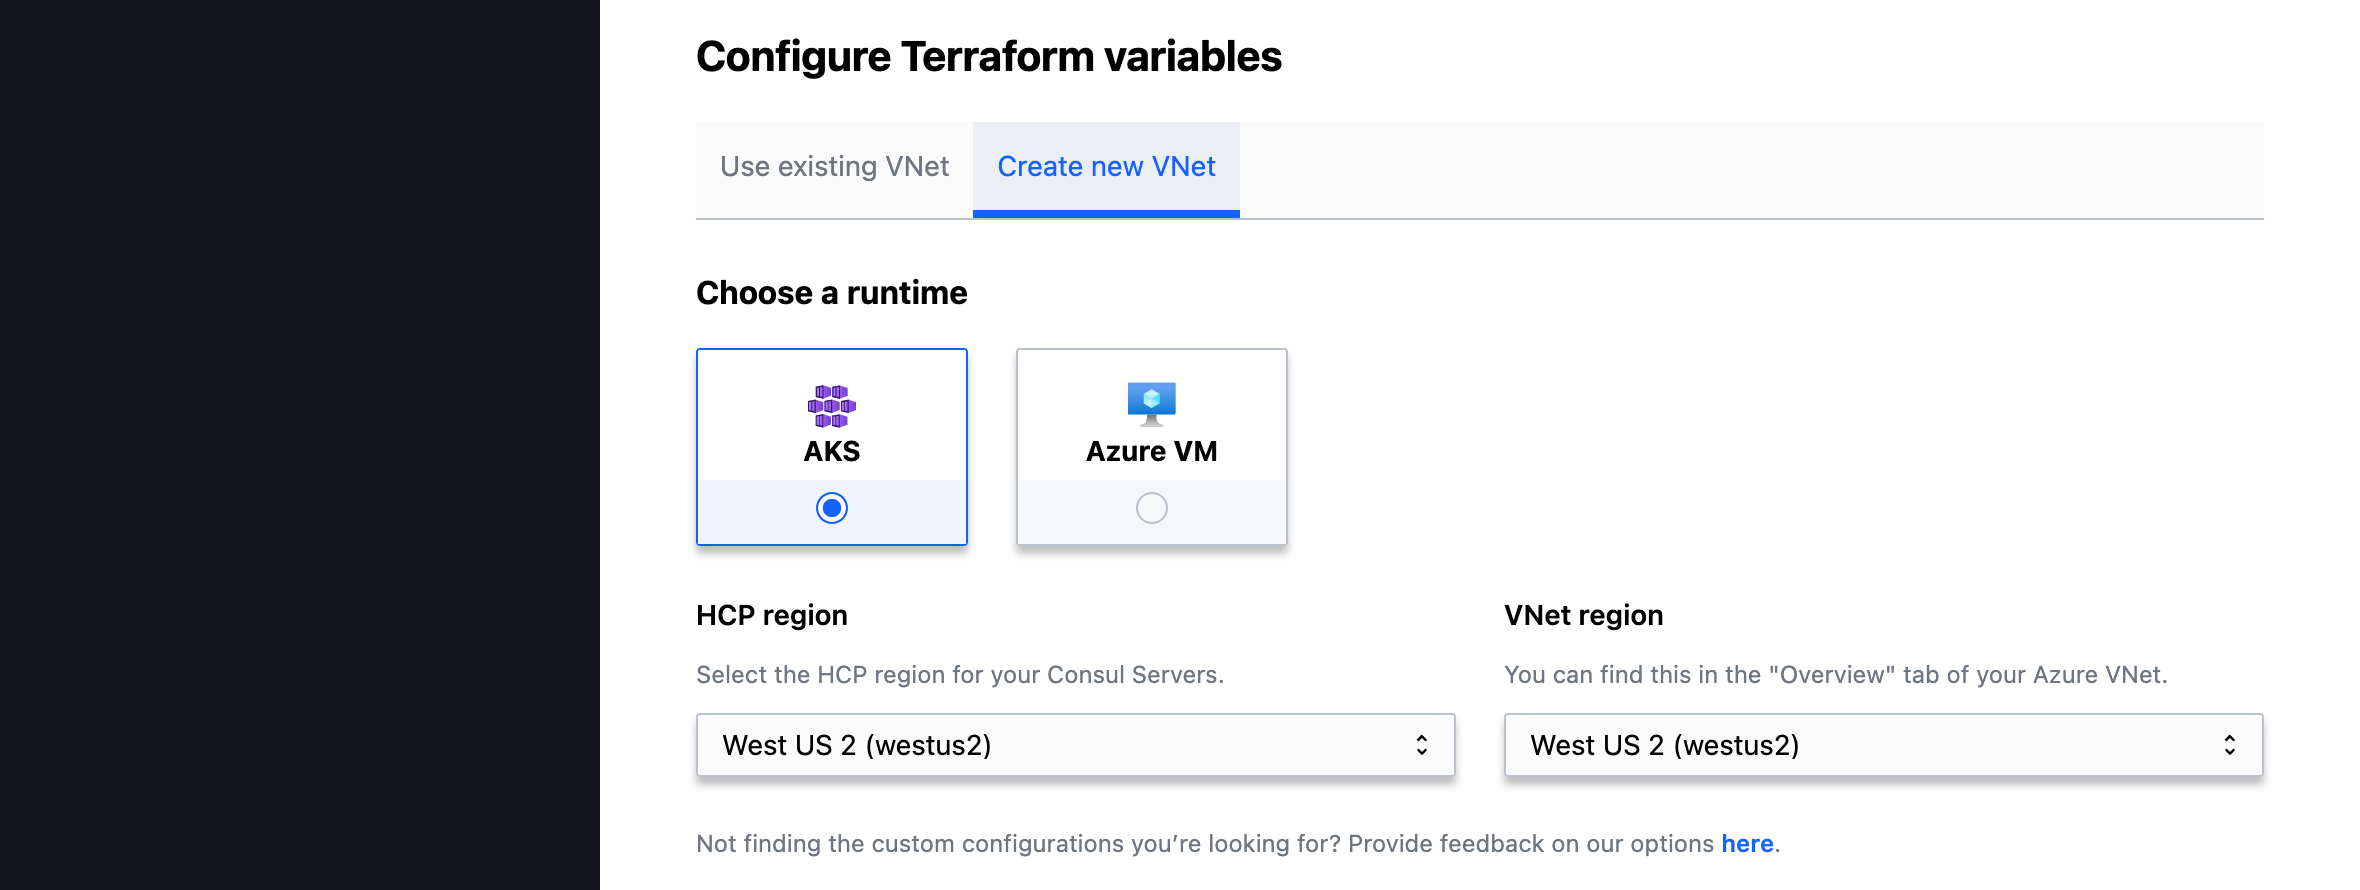 HCP UI Consul - Deploy with Terraform - AKS with new
VNet